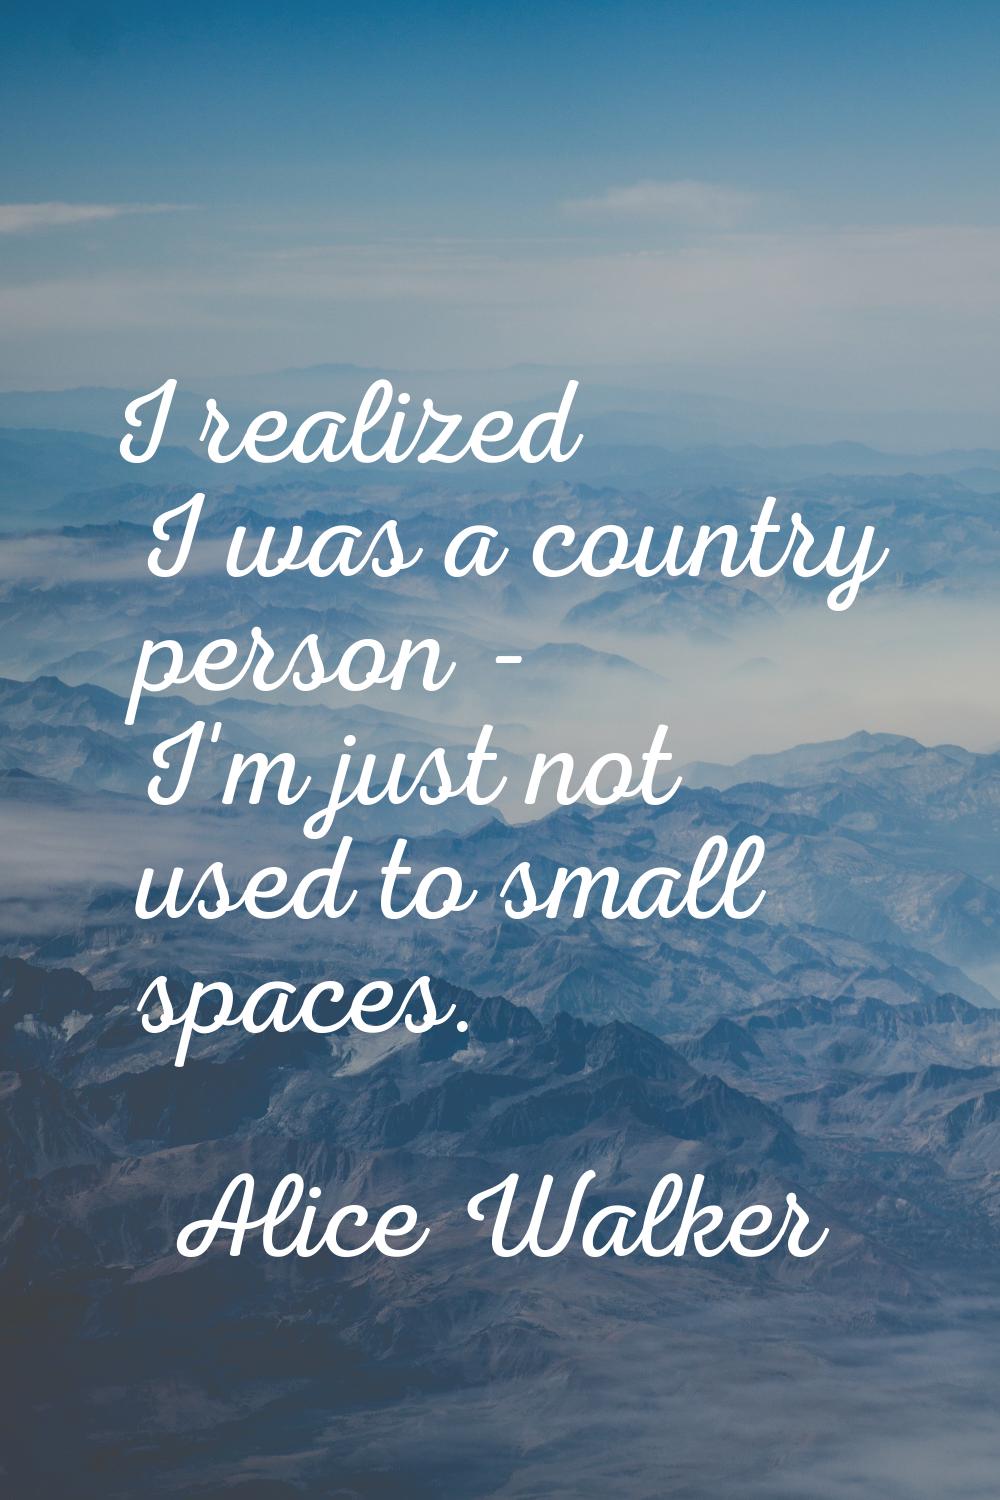 I realized I was a country person - I'm just not used to small spaces.